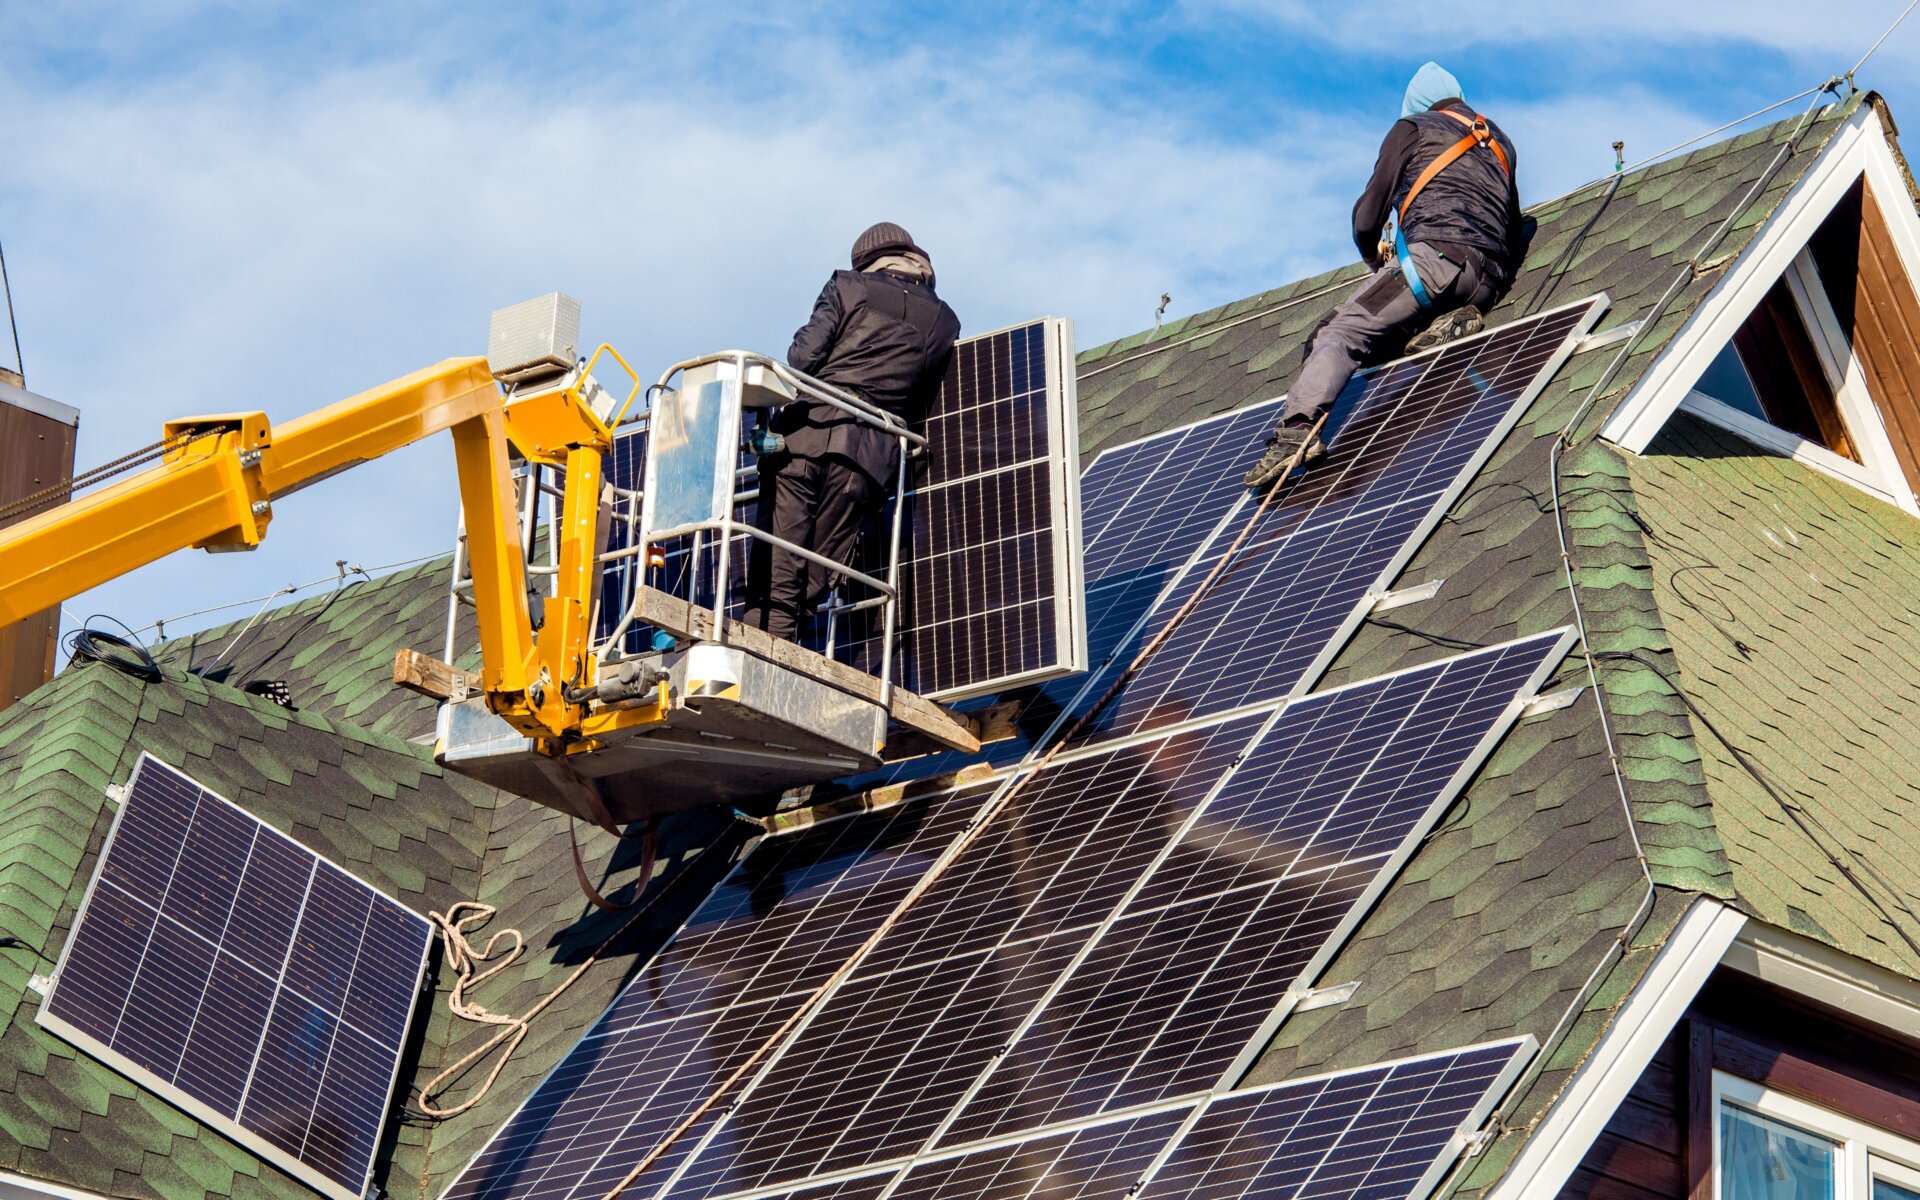 Workers installing solar panels on private home hexagonal roof felt on sunny day, blue sky. Photo via Adobe Stock.